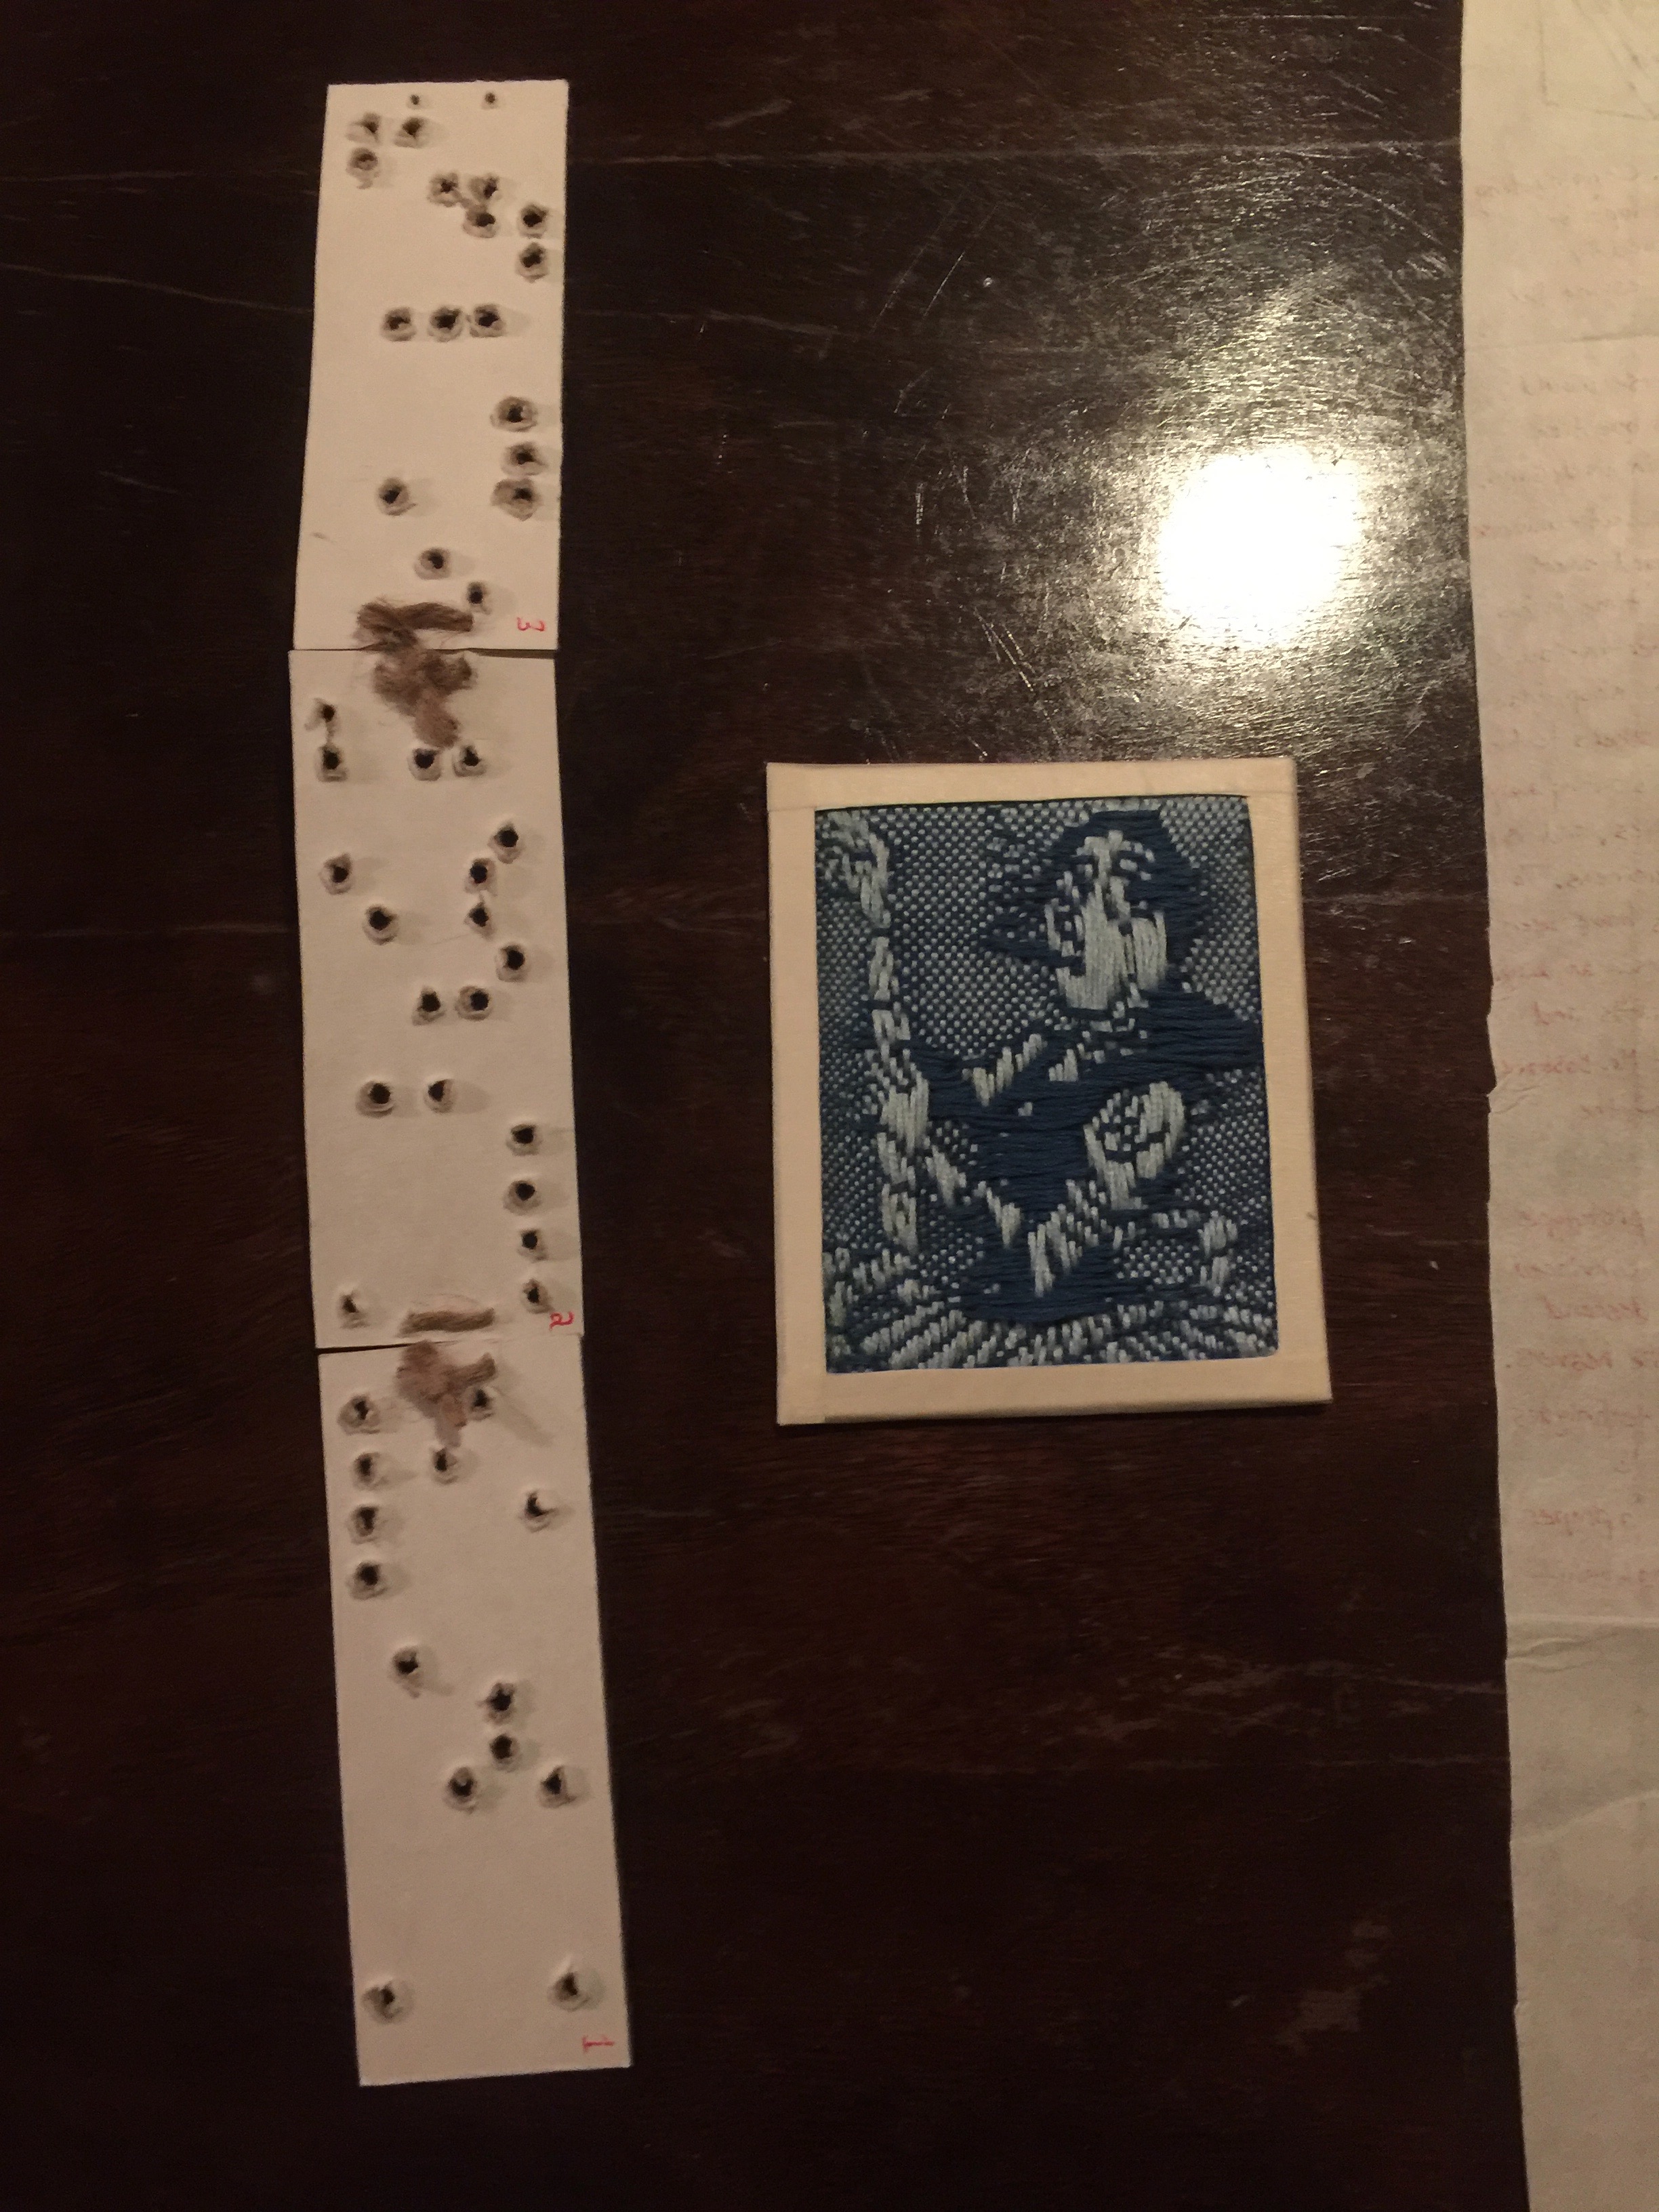 A model Jacquard loom punchcard and a woven figure of Ada Lovelace partly drawn from the pattern encoded in these cards.